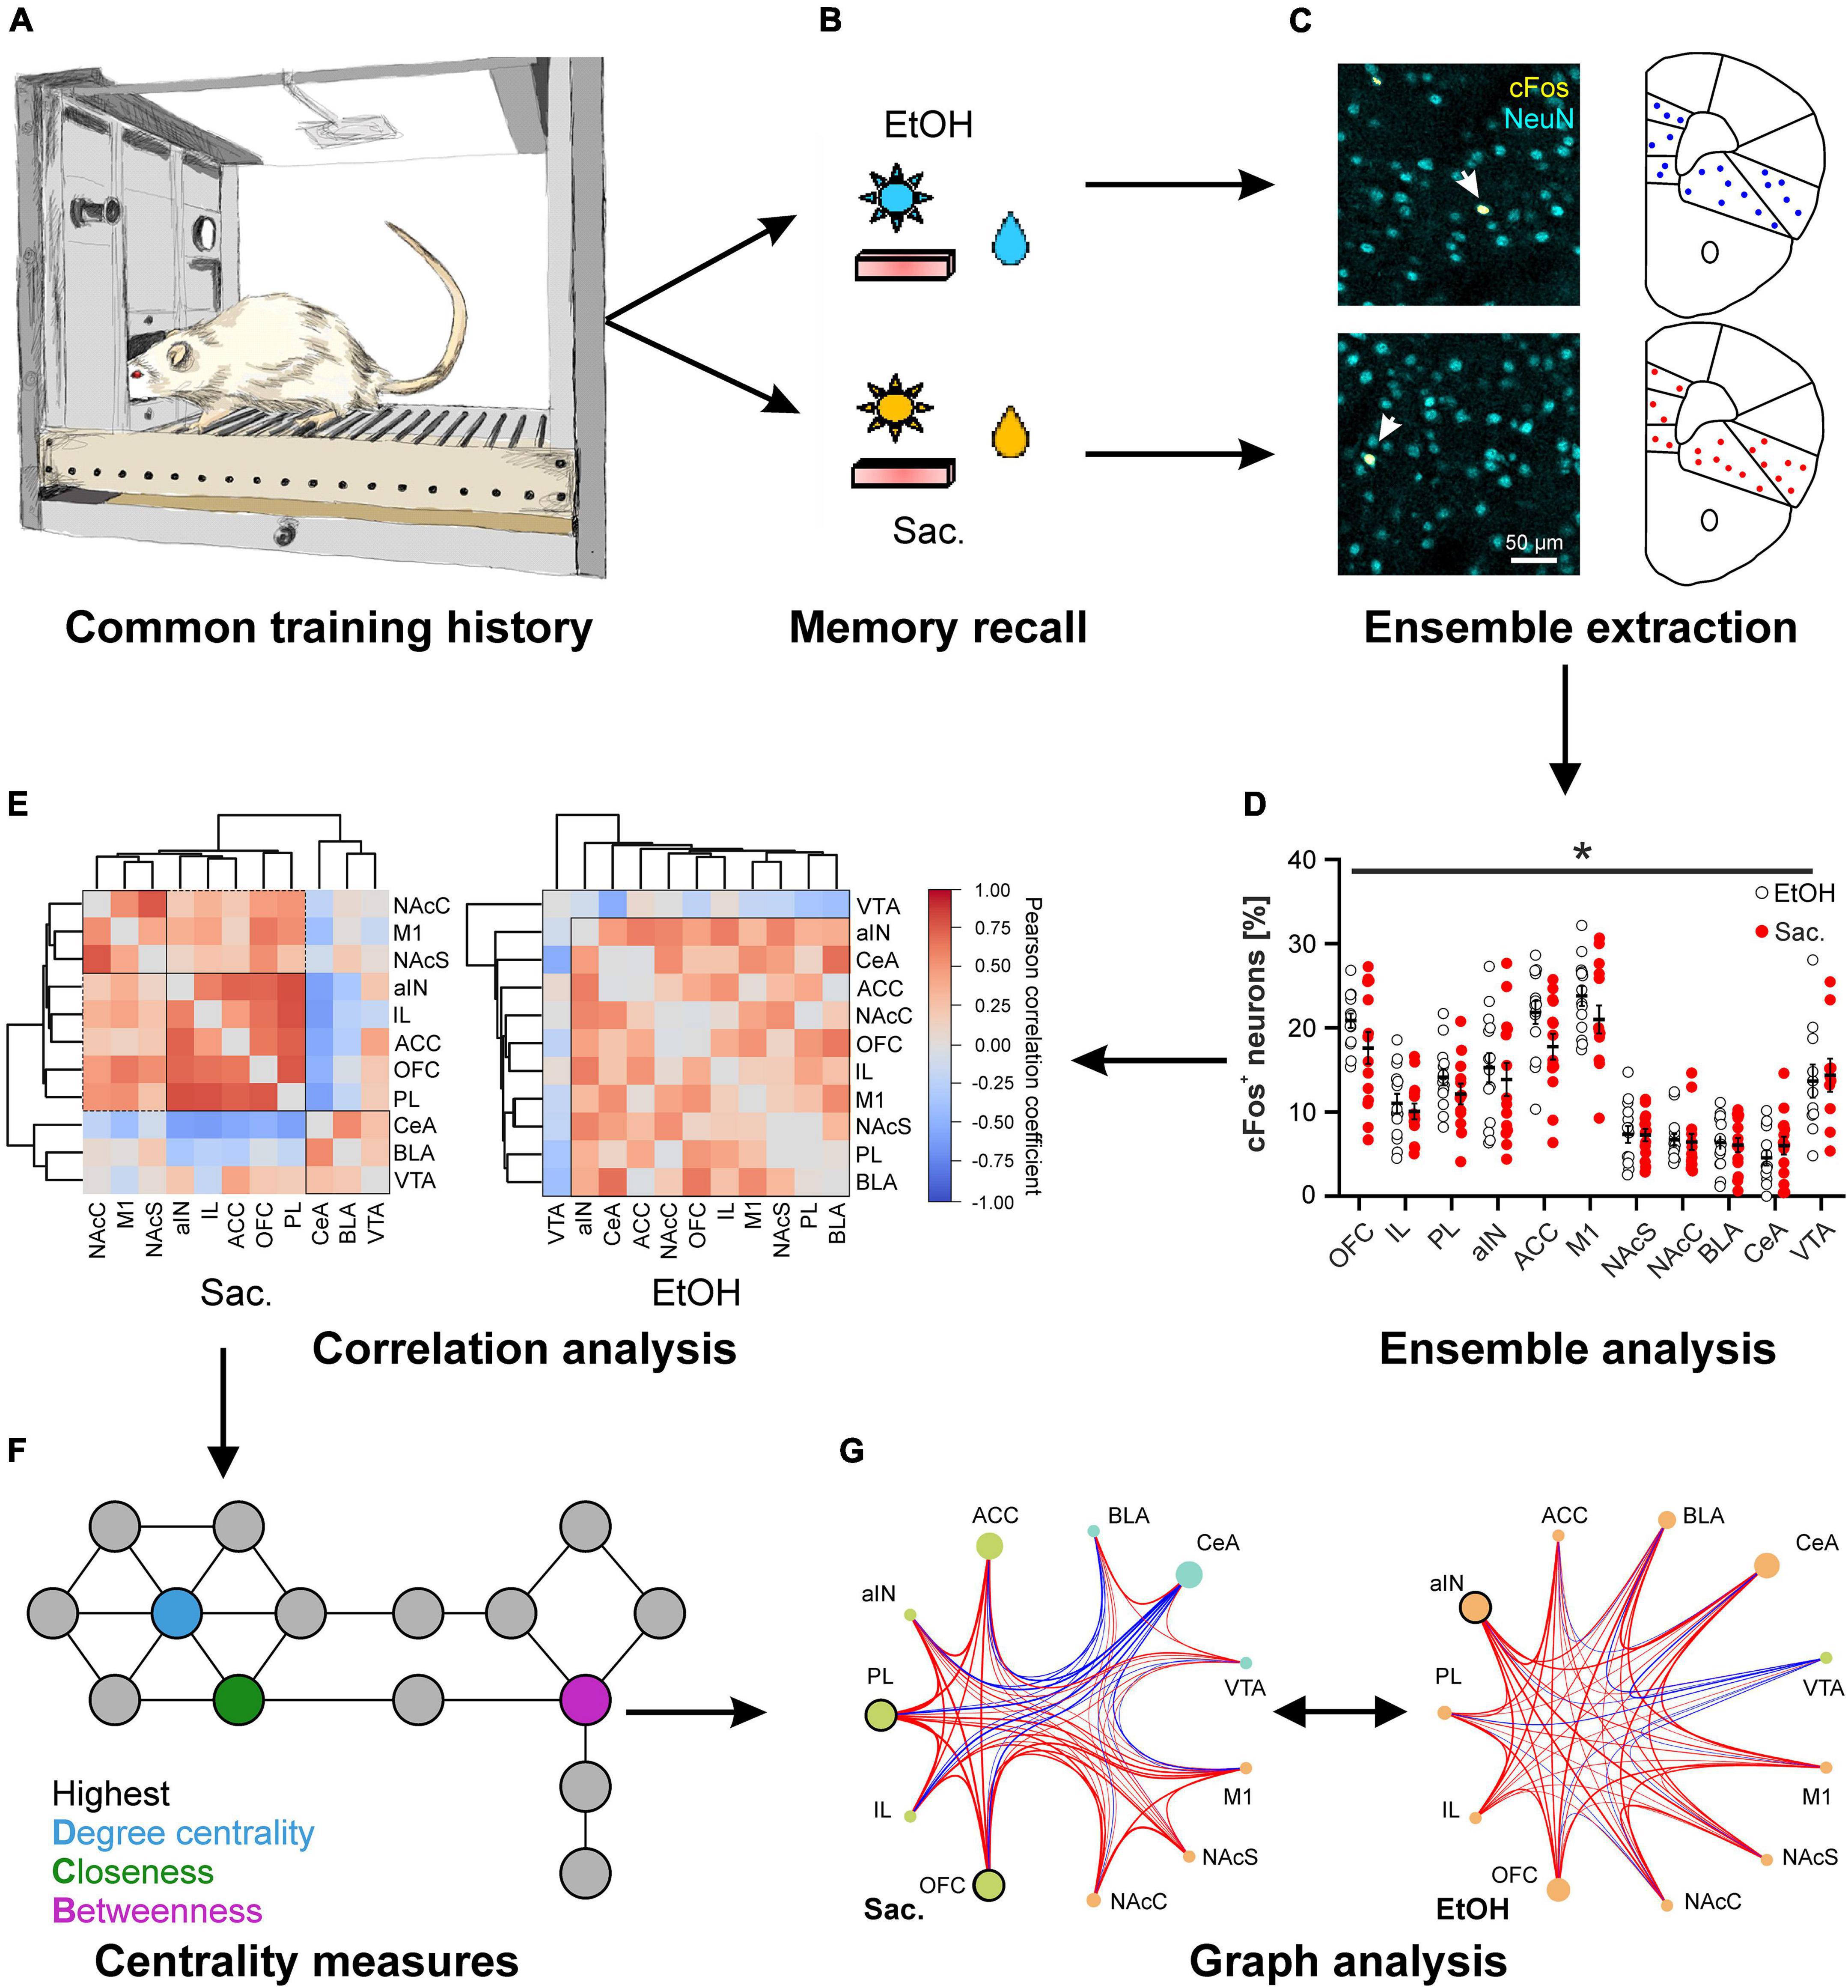 Whole-brain tracking of cocaine and sugar rewards processing